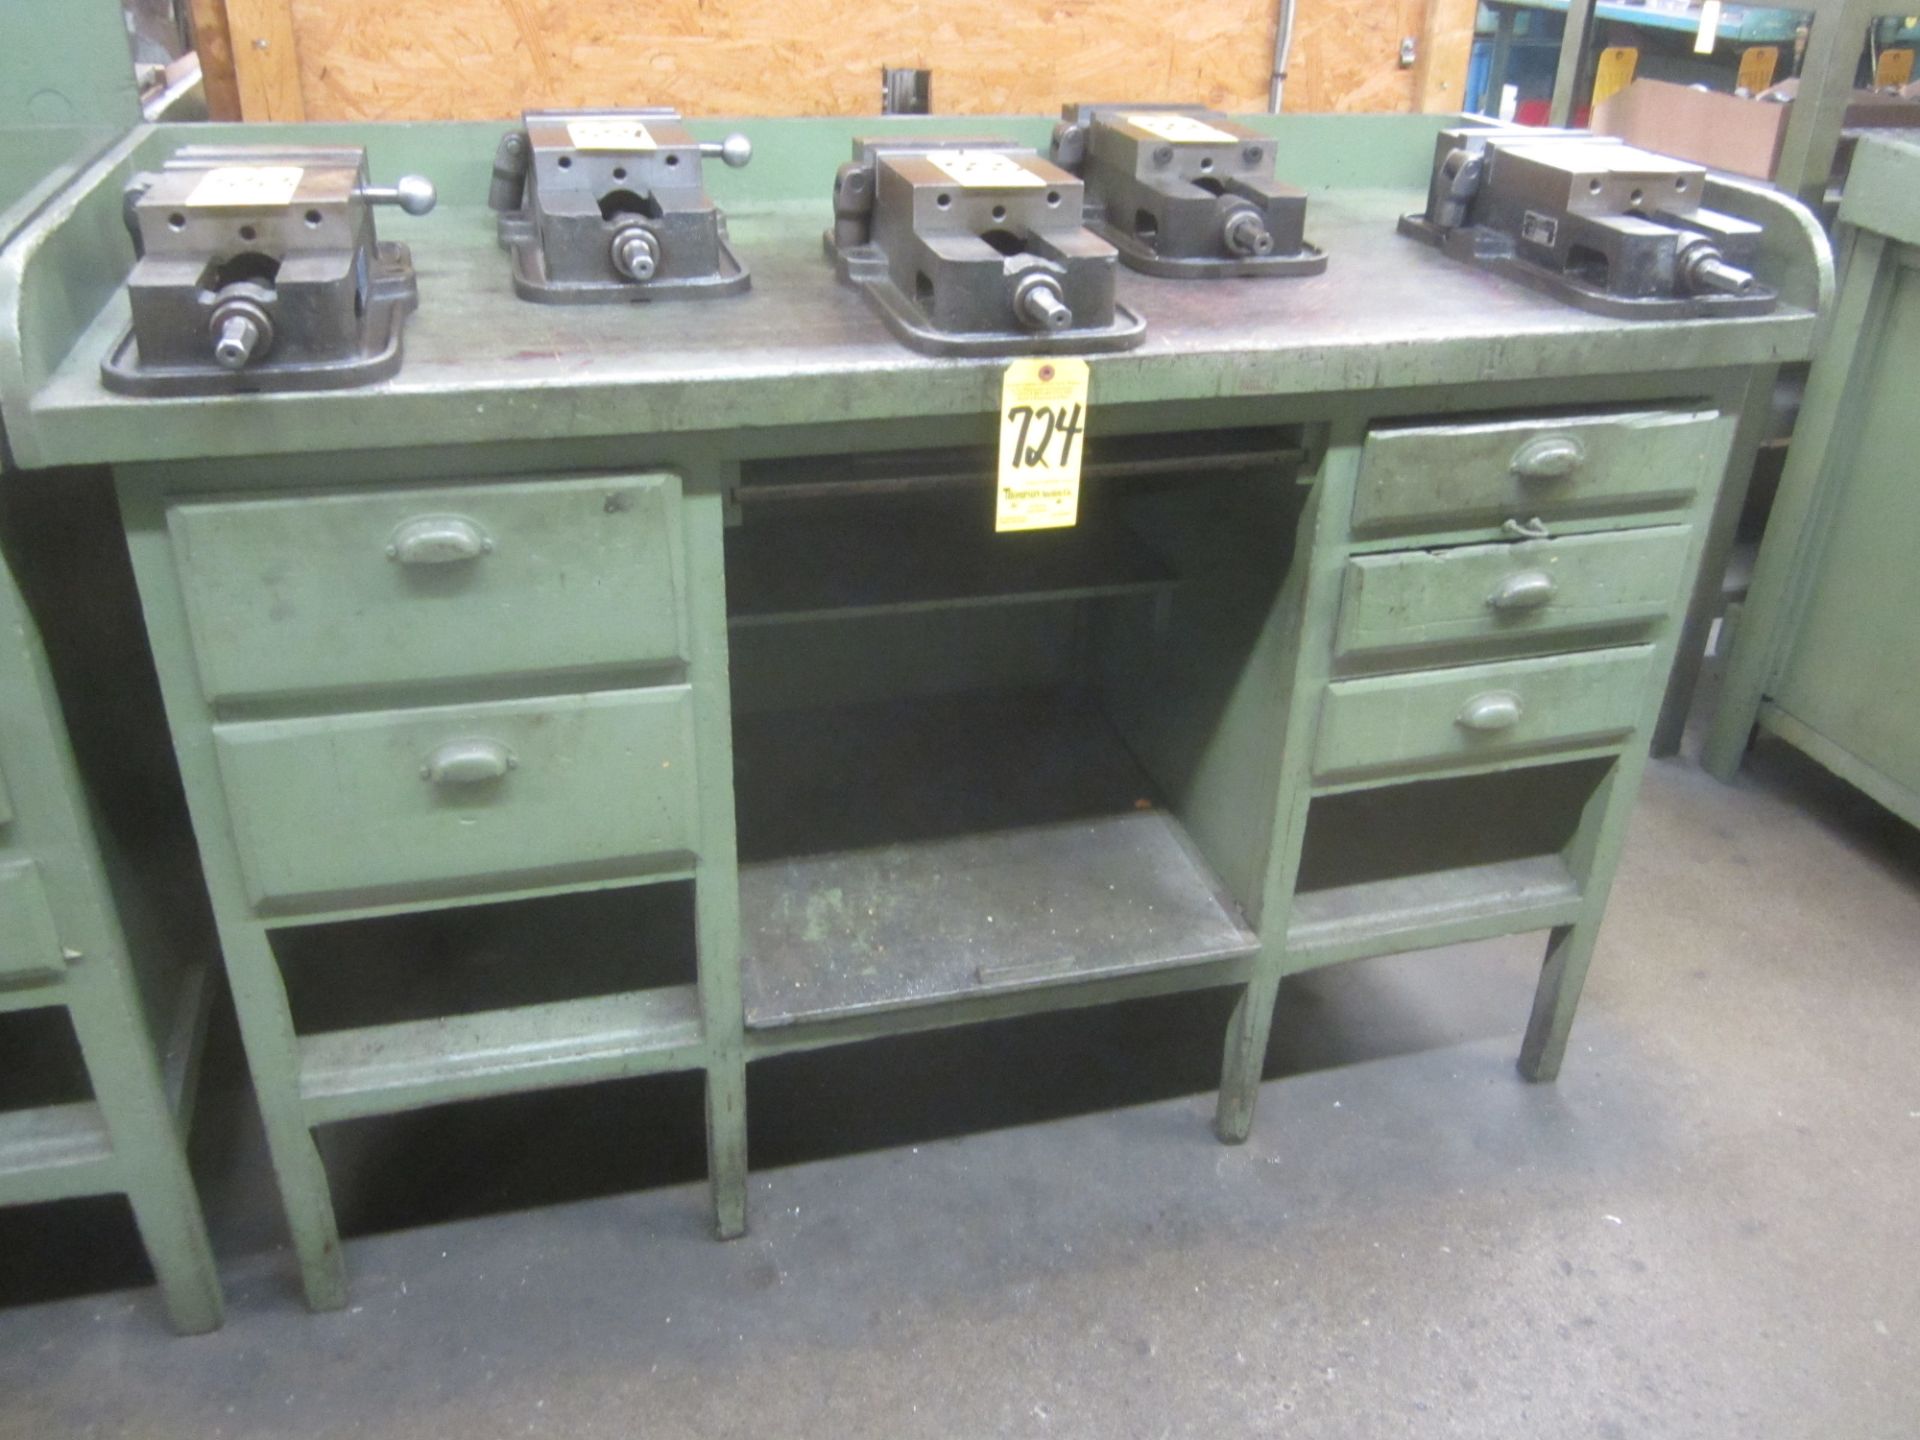 Wooden Toolmaker's Bench - No Contents in Photo